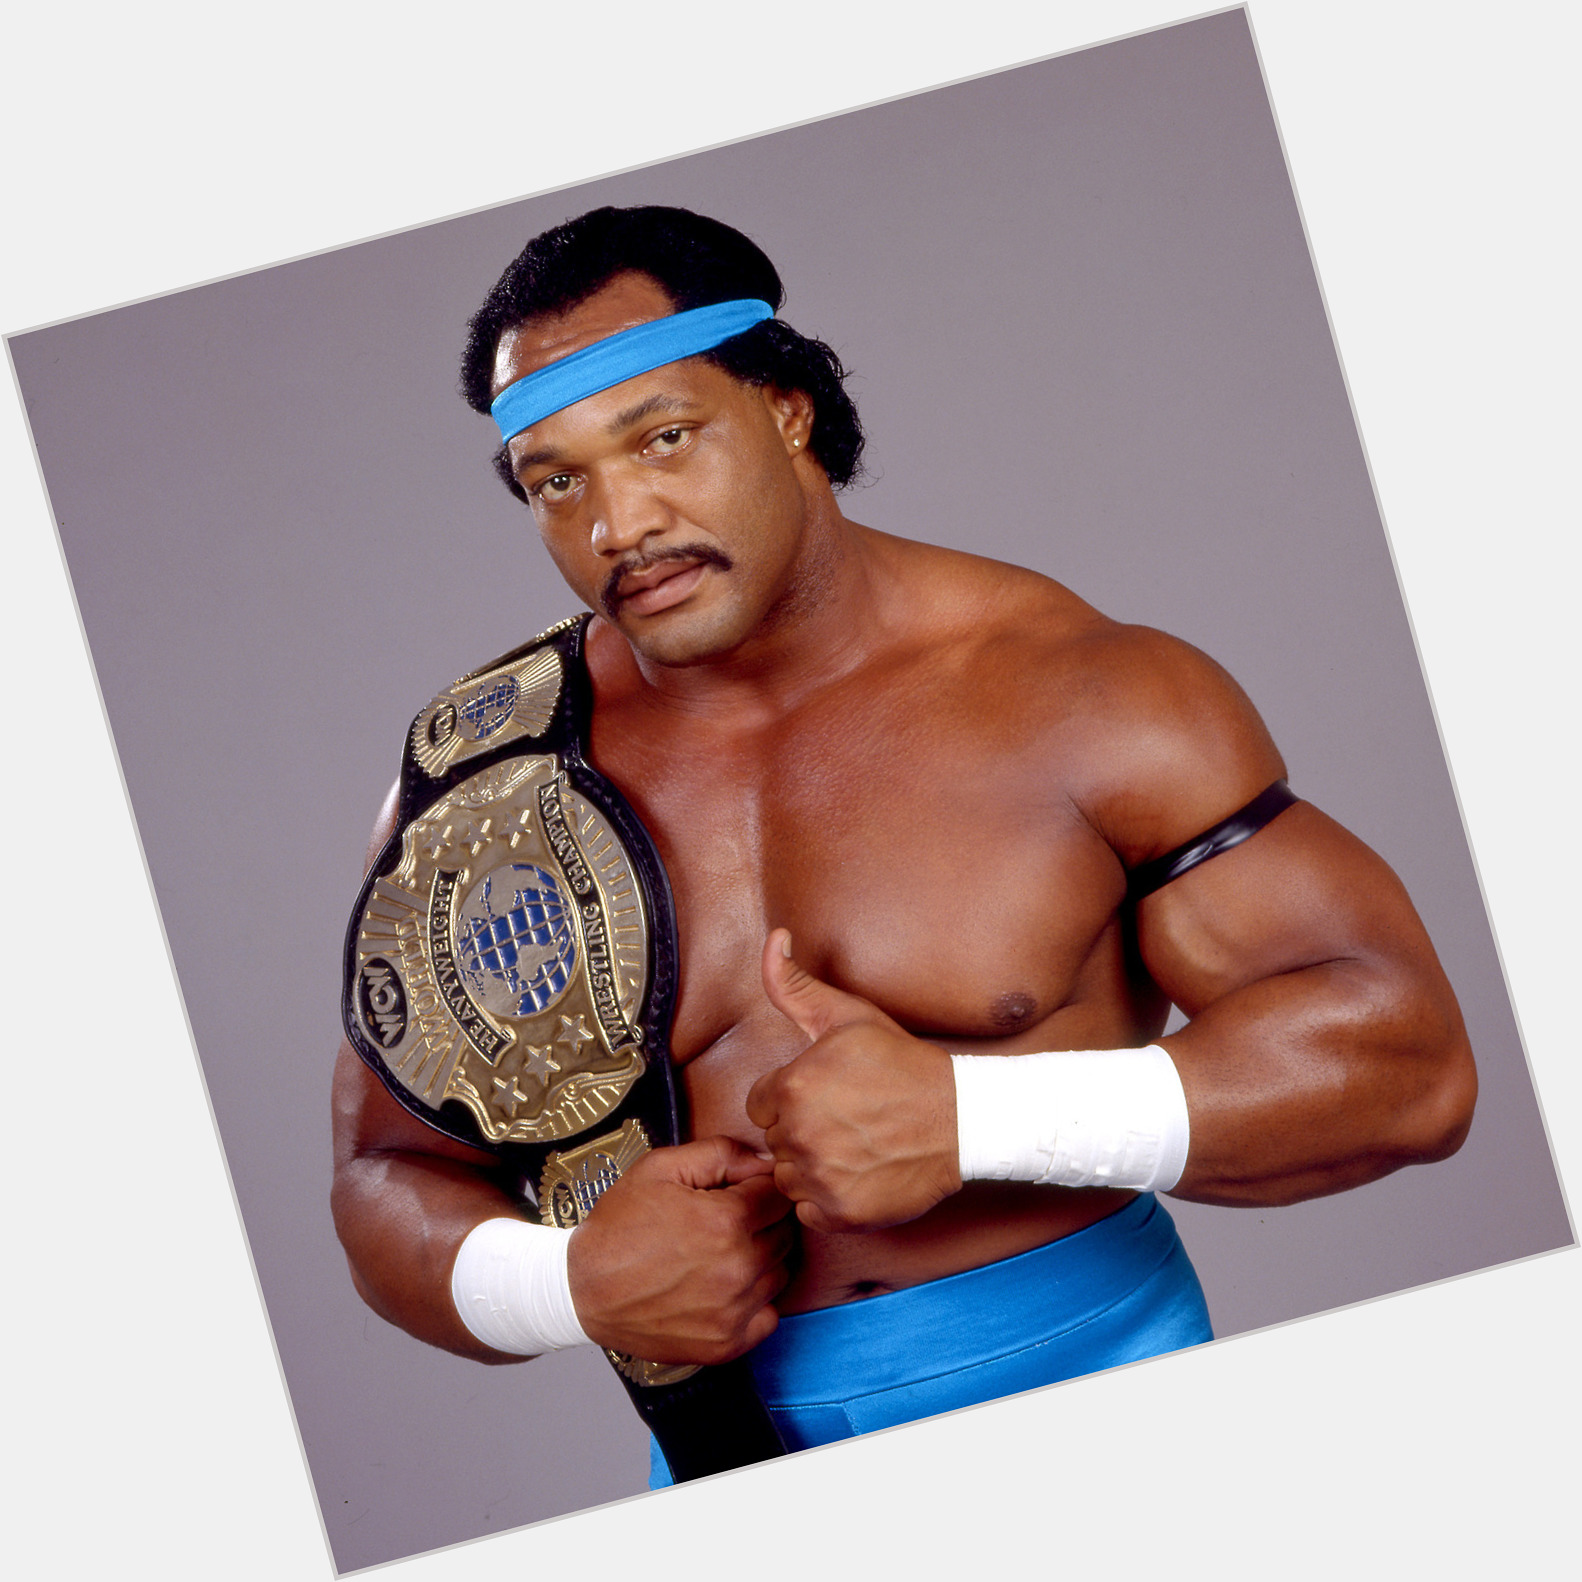 Https://fanpagepress.net/m/R/Ron Simmons Exclusive Hot Pic 3